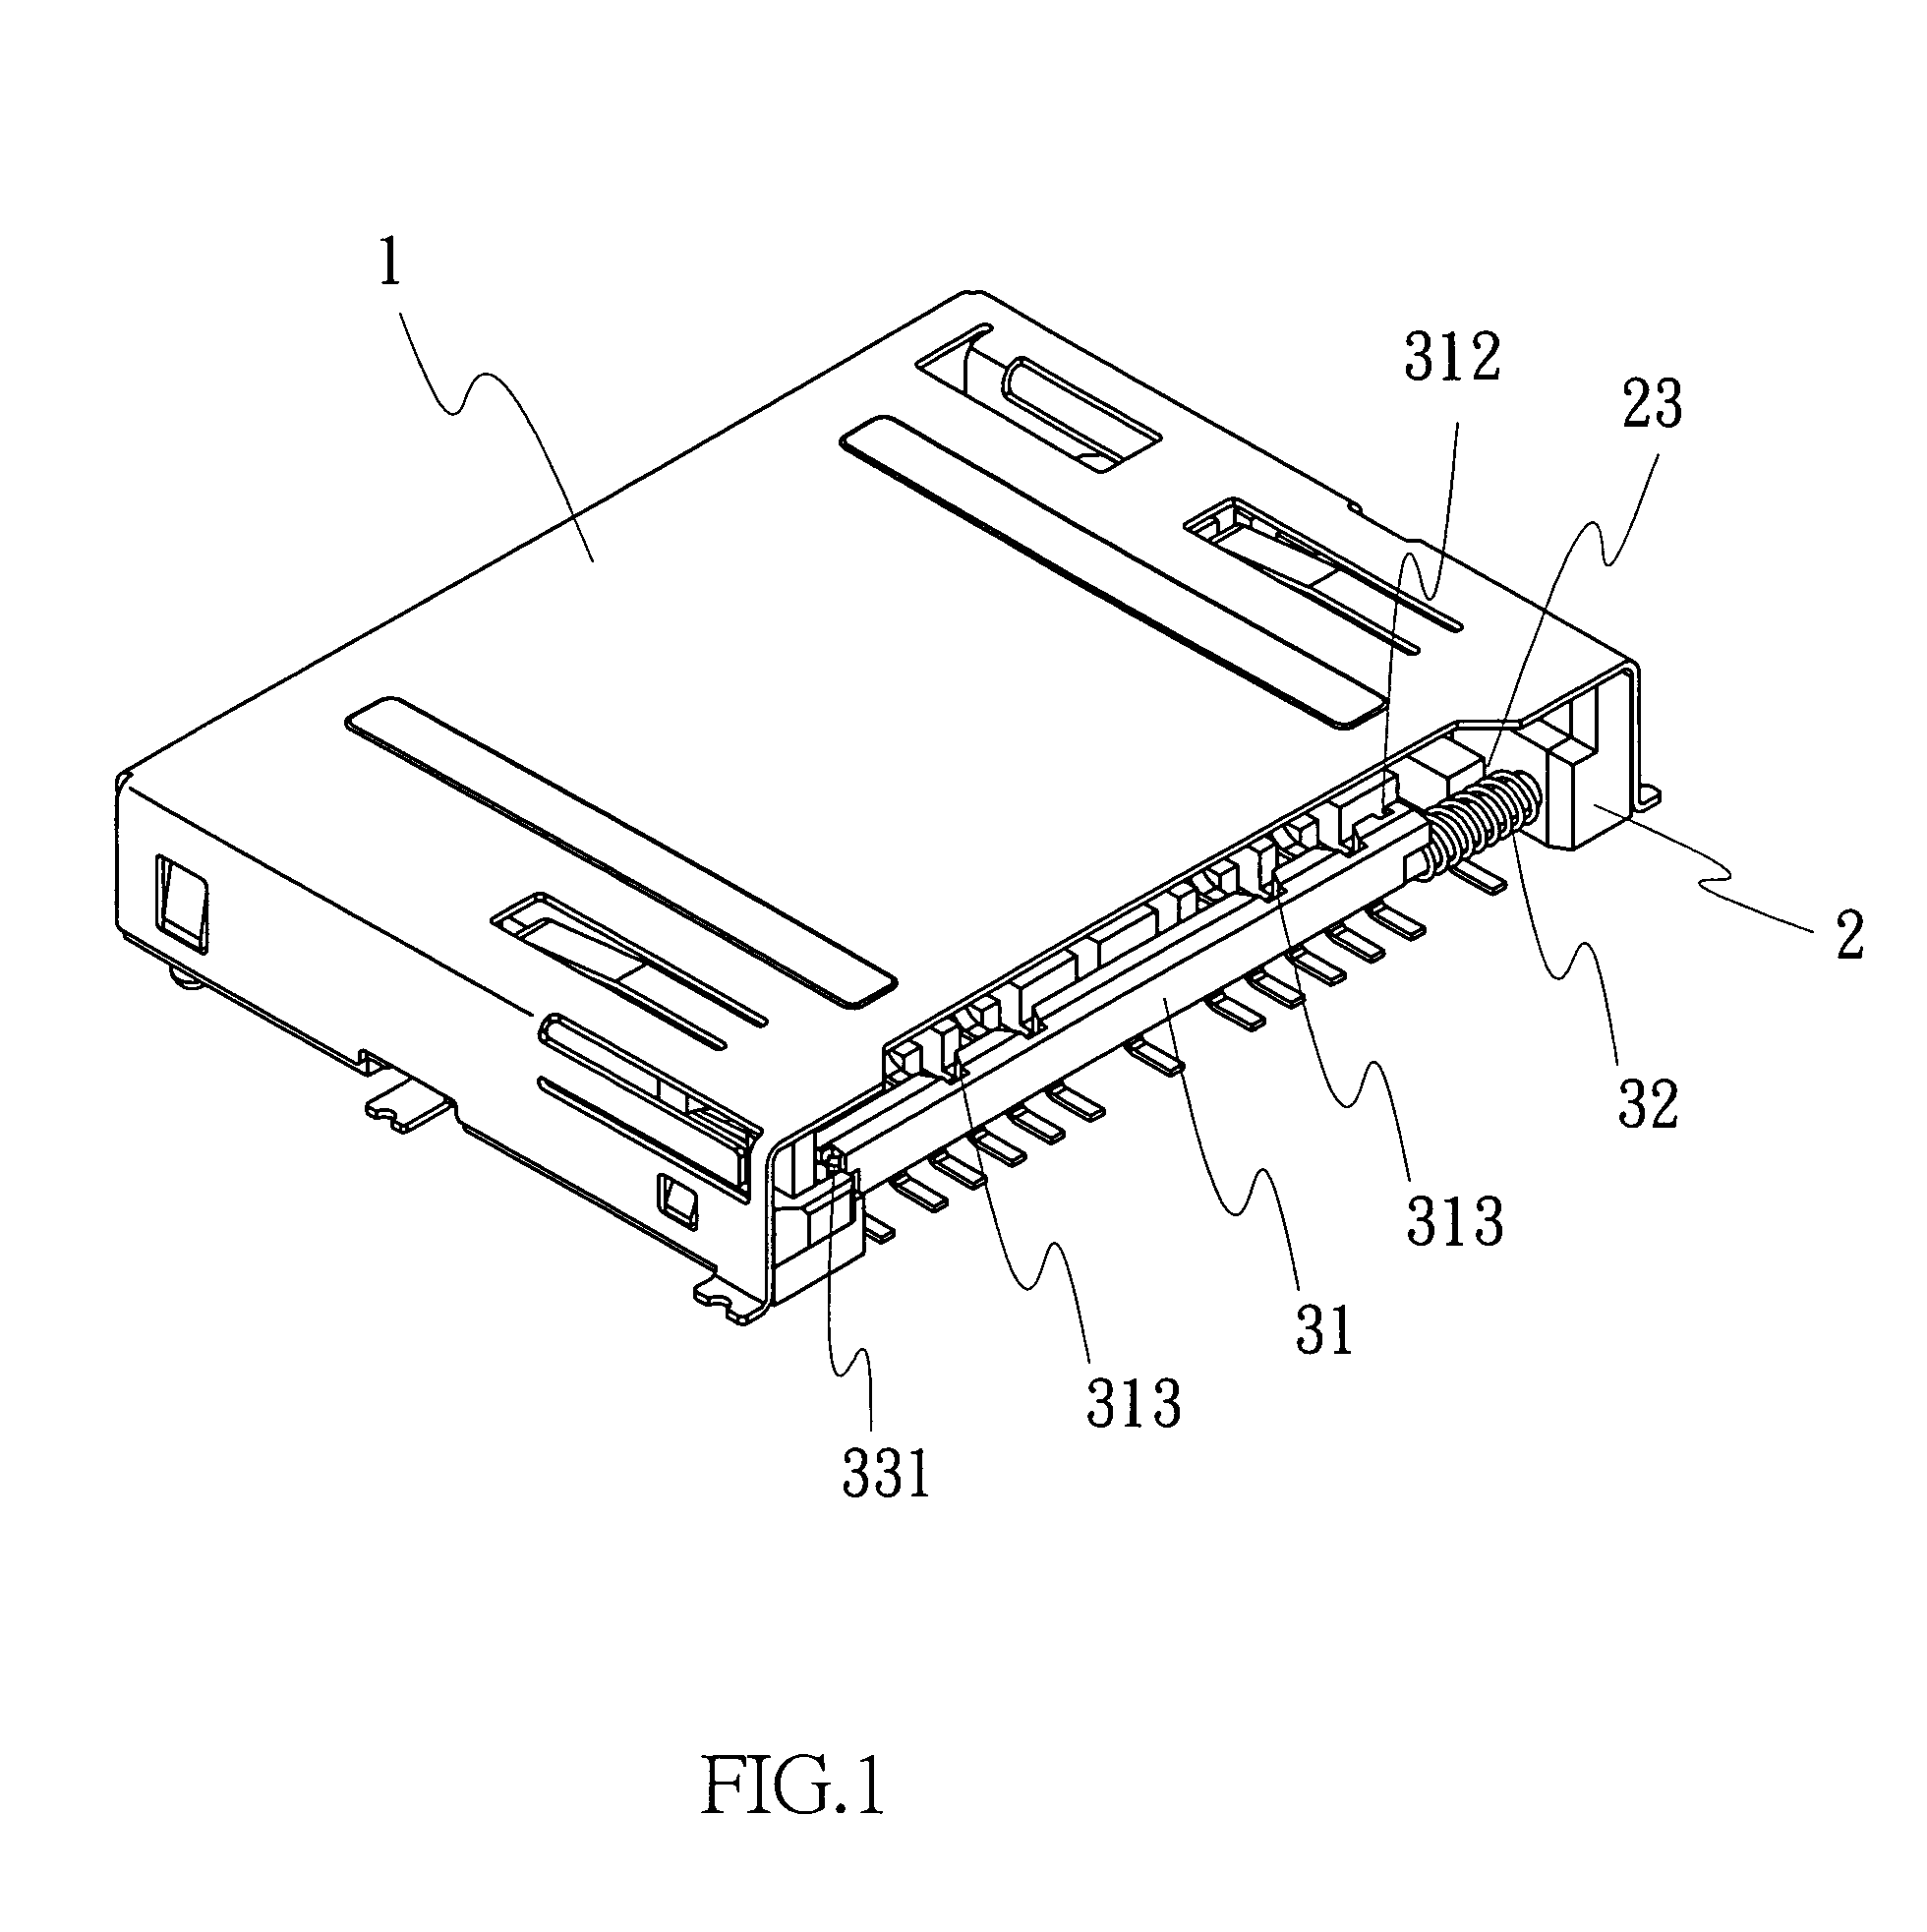 Universal memory card adapter having a movable door